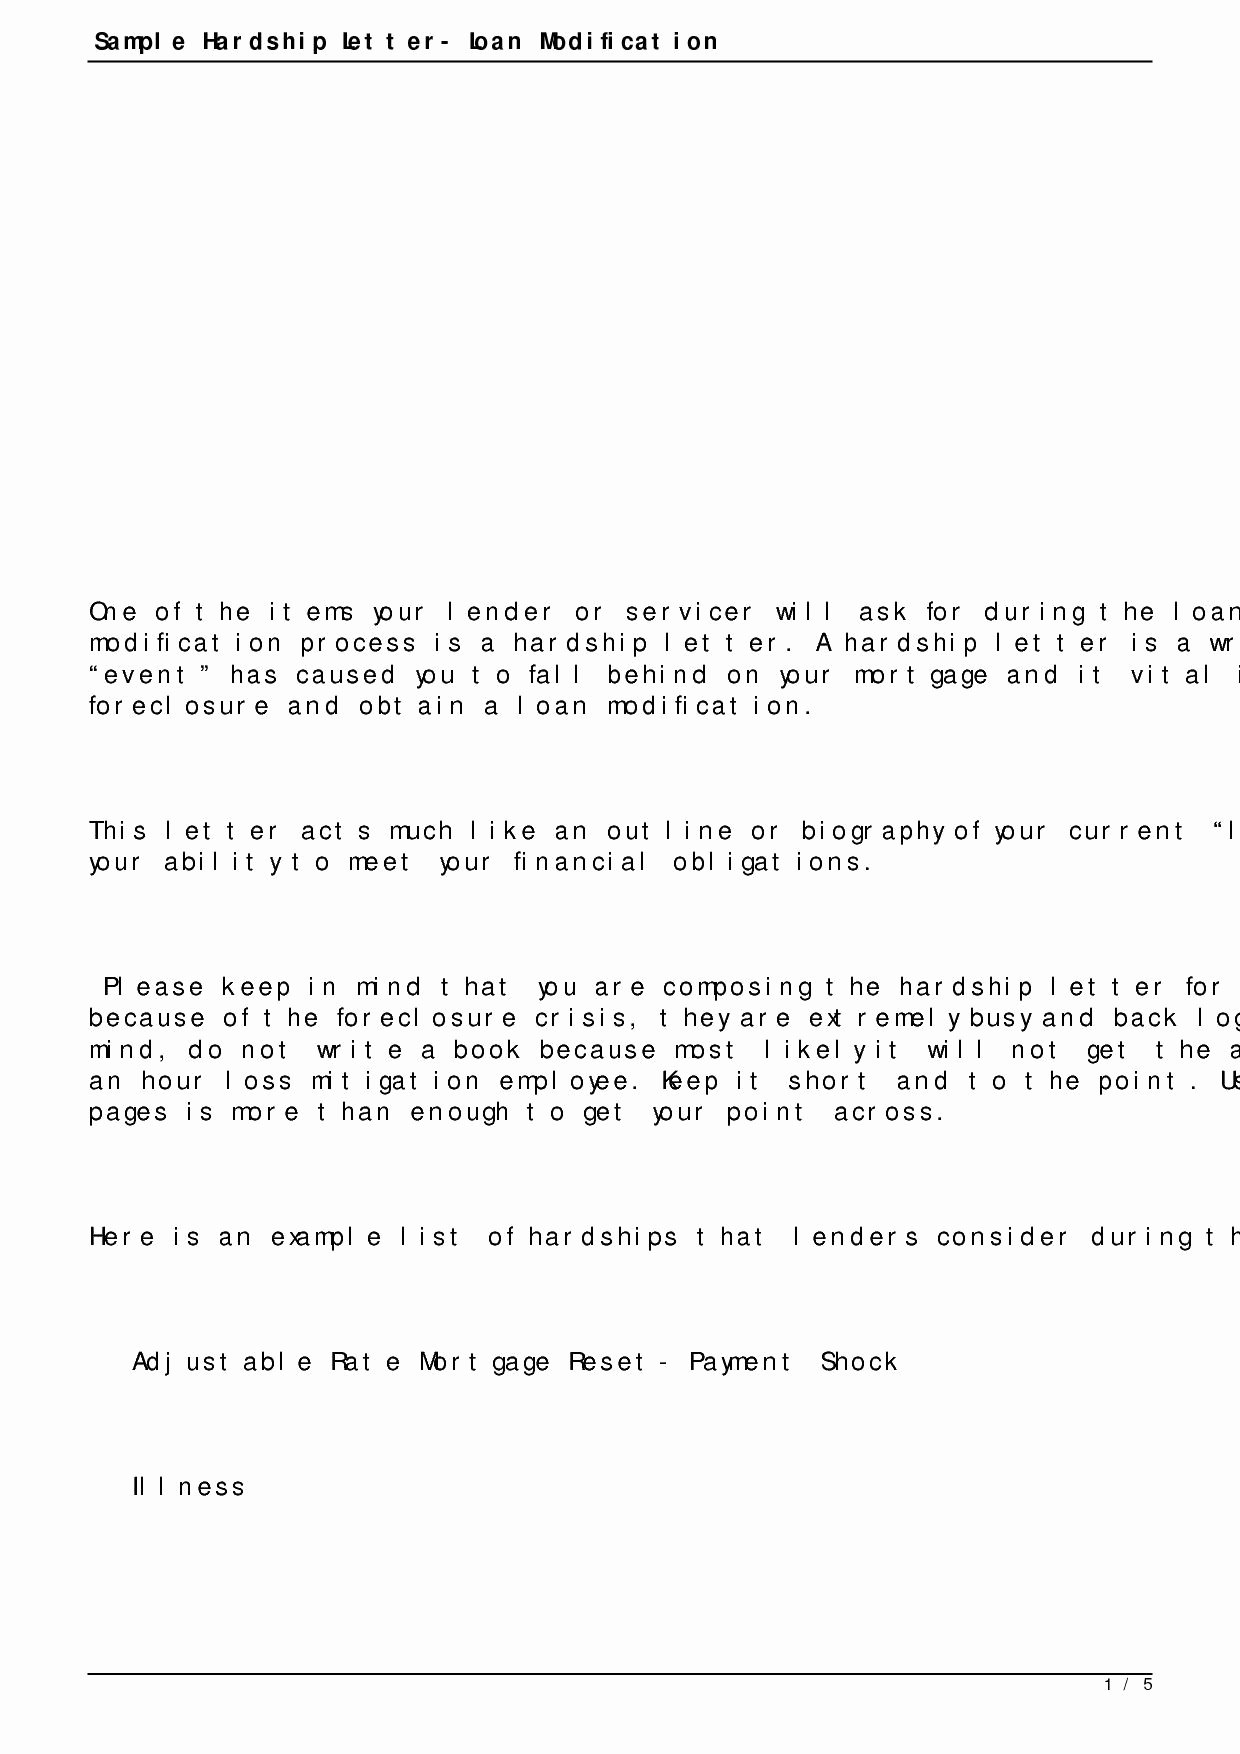 Payment Shock Letter Lovely Mortgage Payment Shock Letter Template Collection